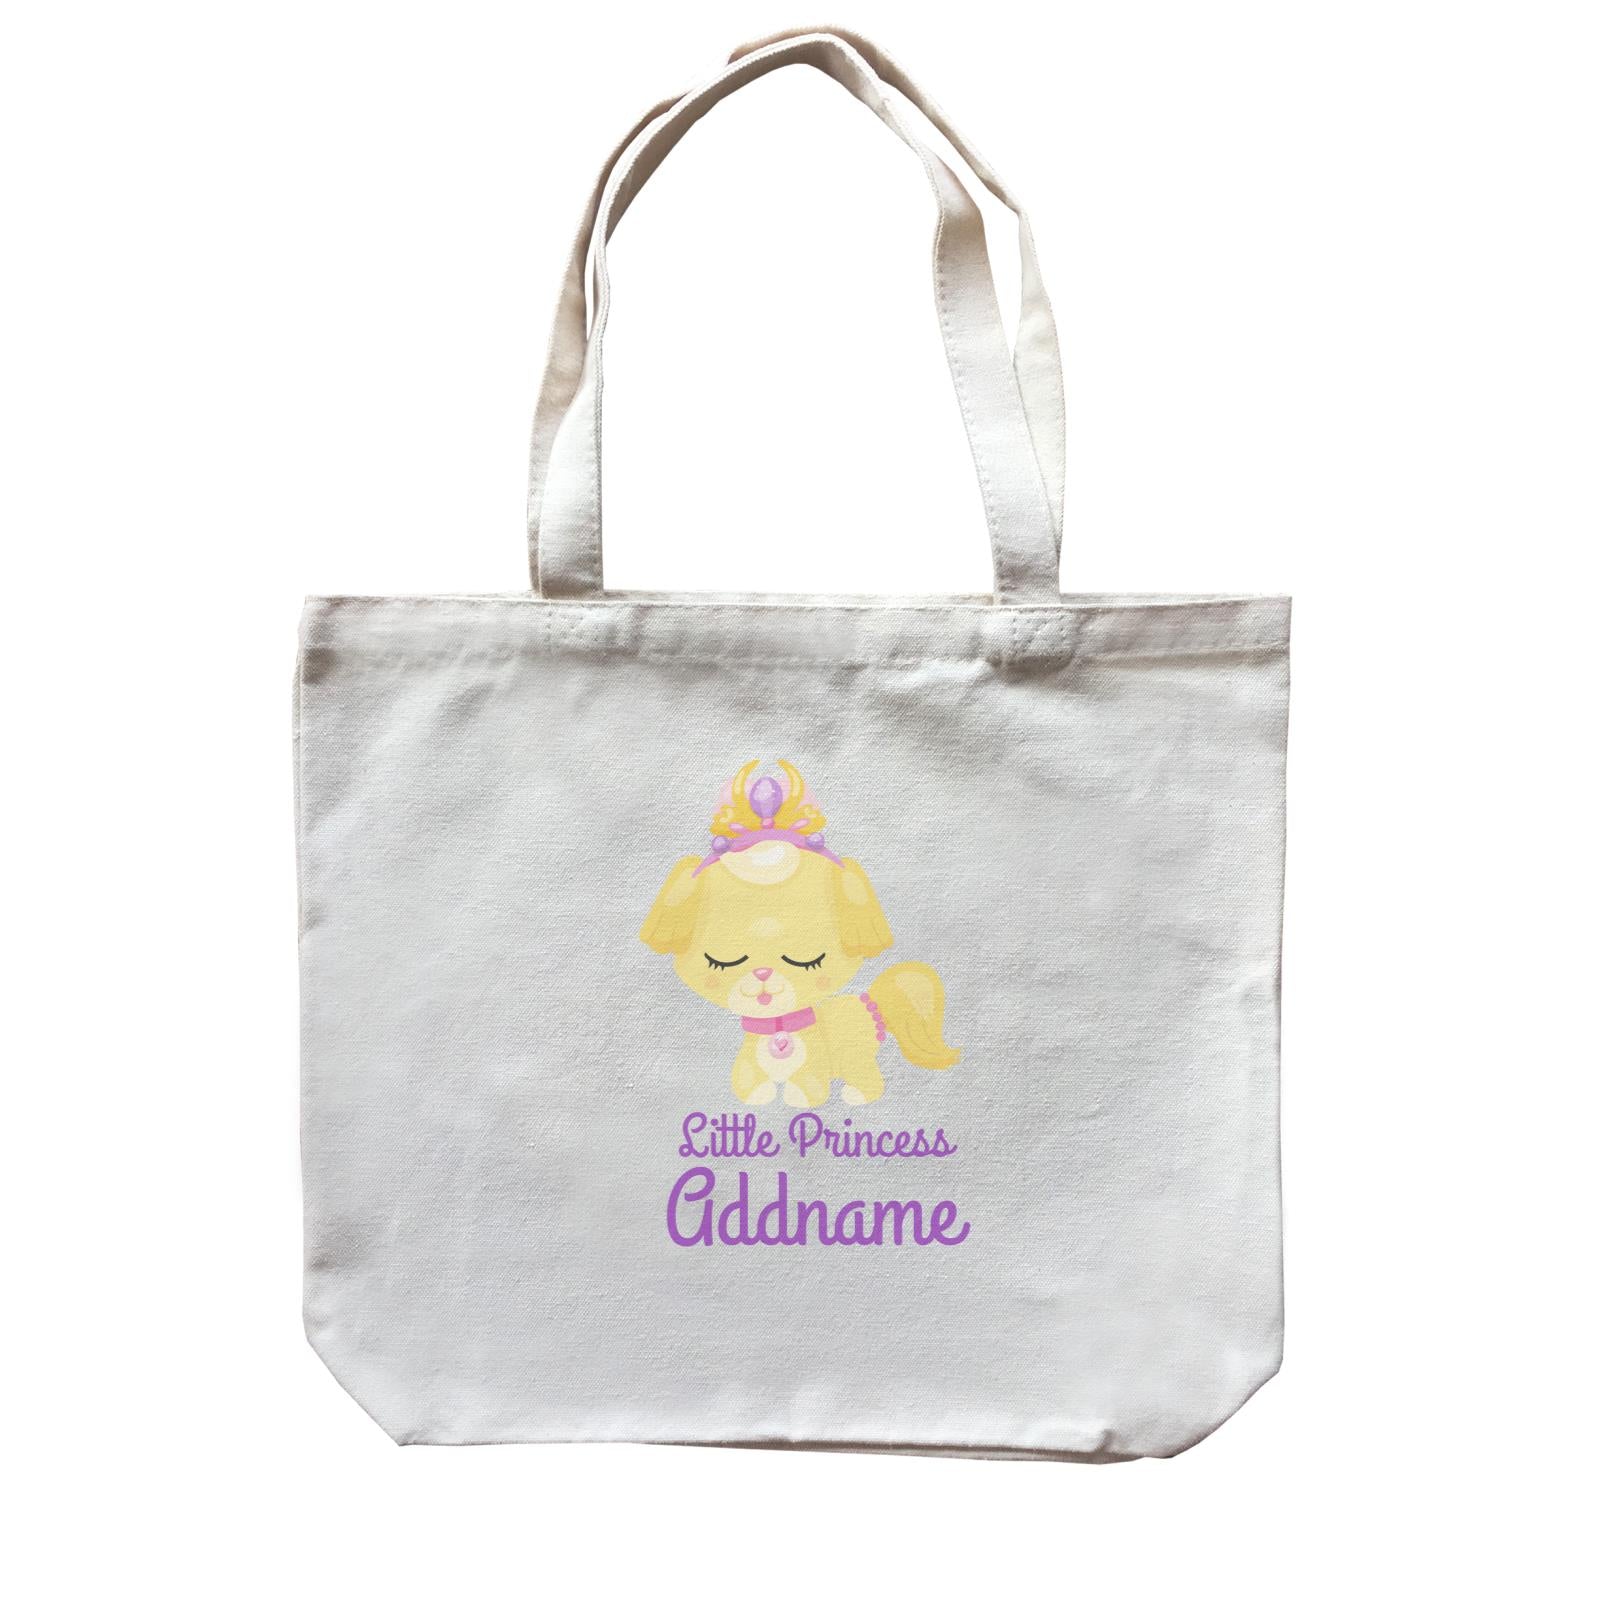 Little Princess Pets Yellow Dog with Crown Addname Canvas Bag